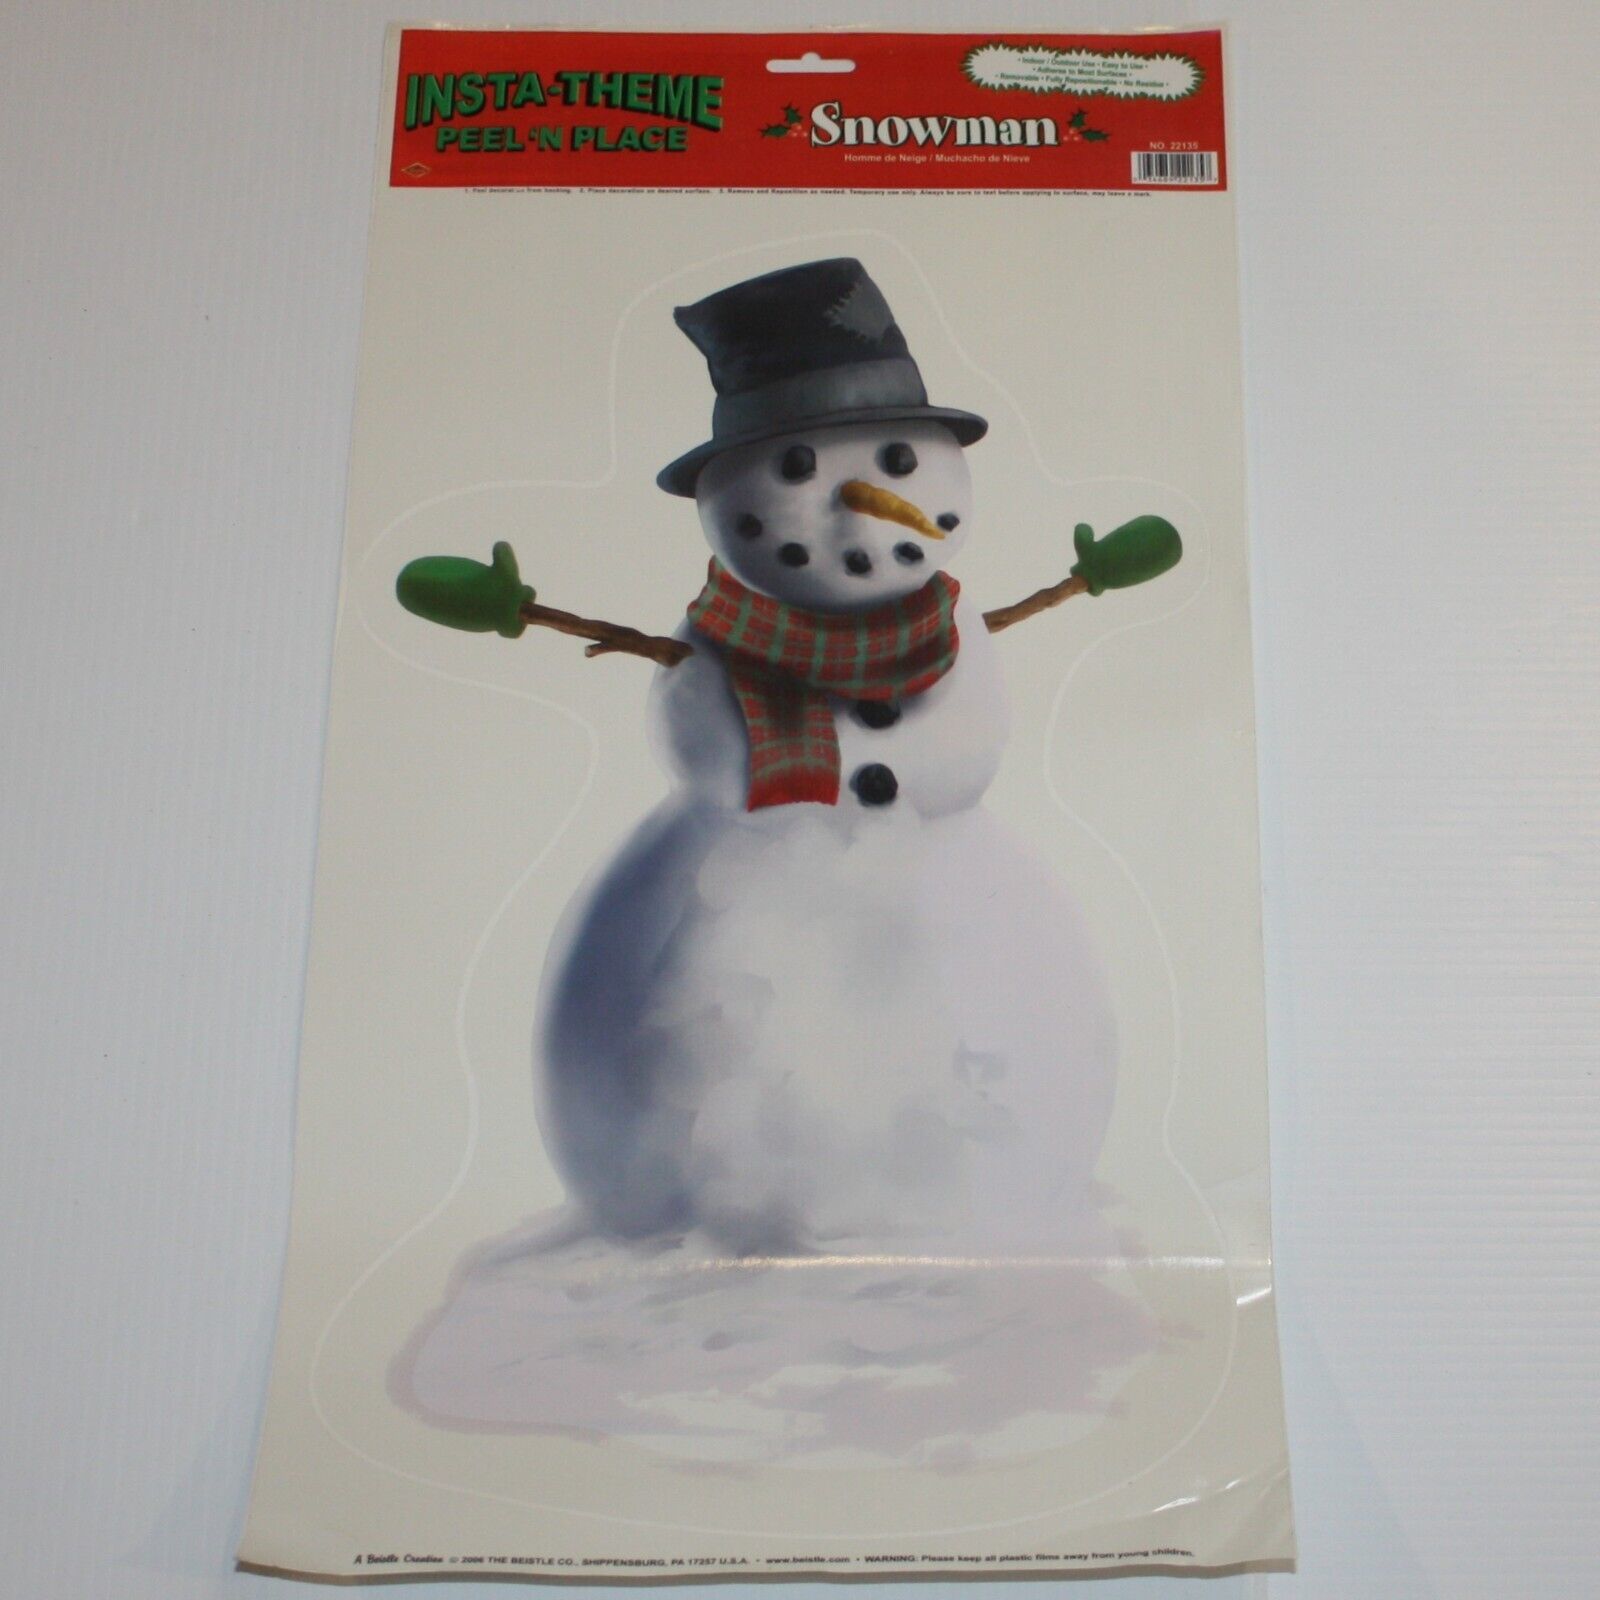 Primary image for Beistle Christmas Snowman Peel 'N Place Holiday Decoration Cling Brand New